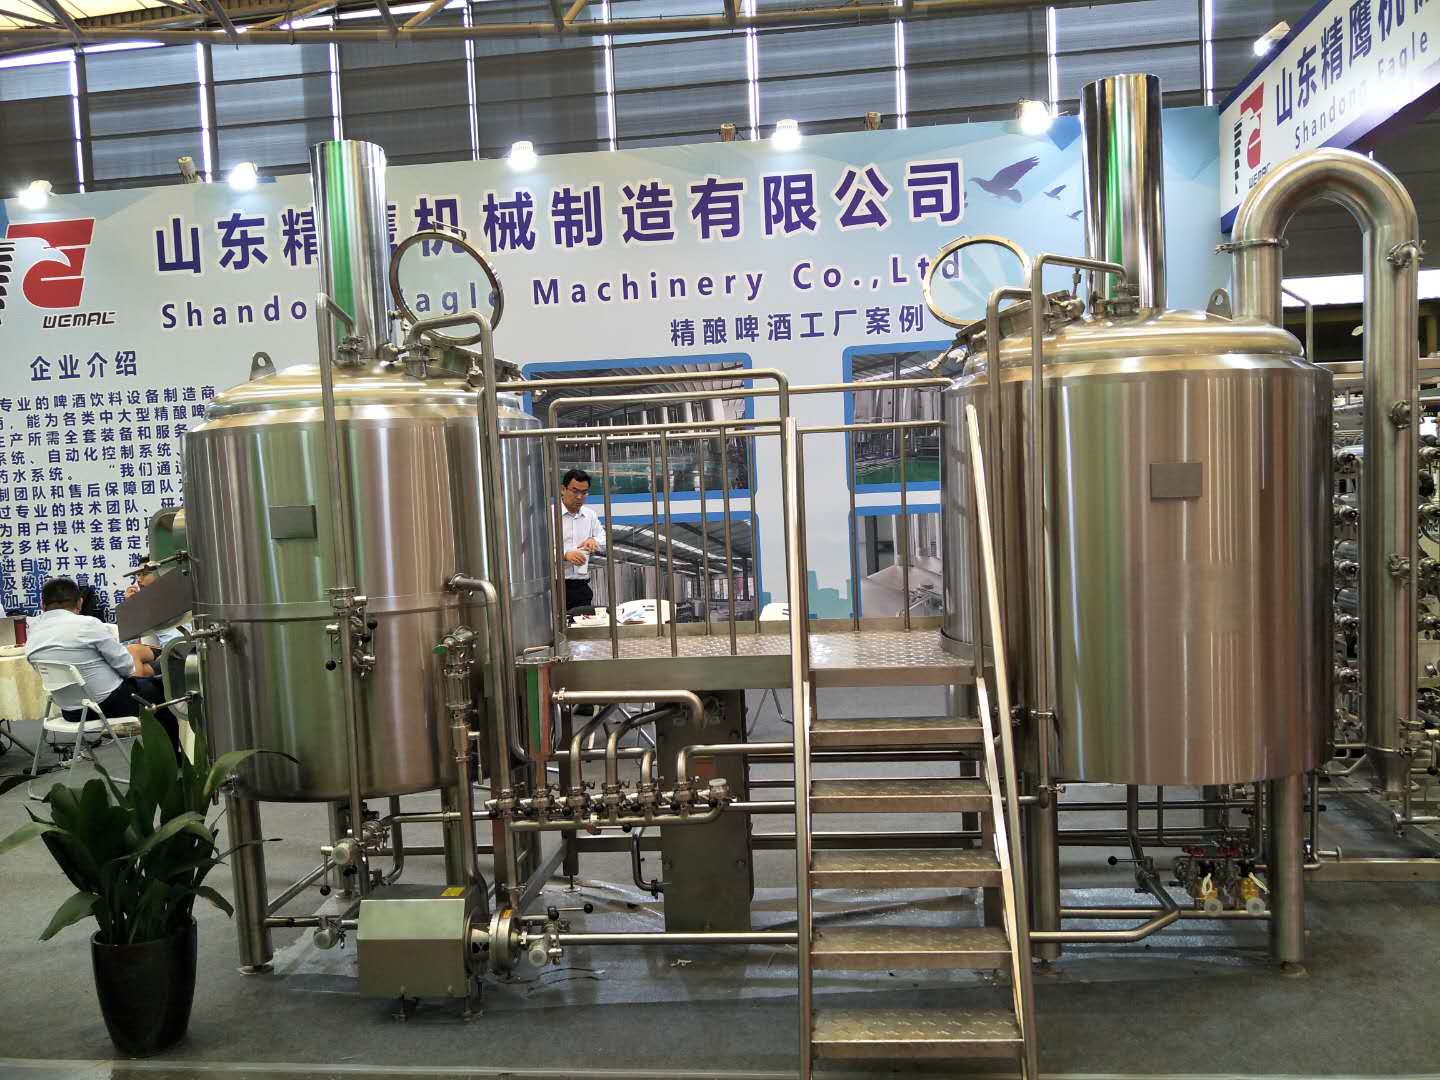 500L Turnkey beer brewing system mash fermentation tank from WEMAC